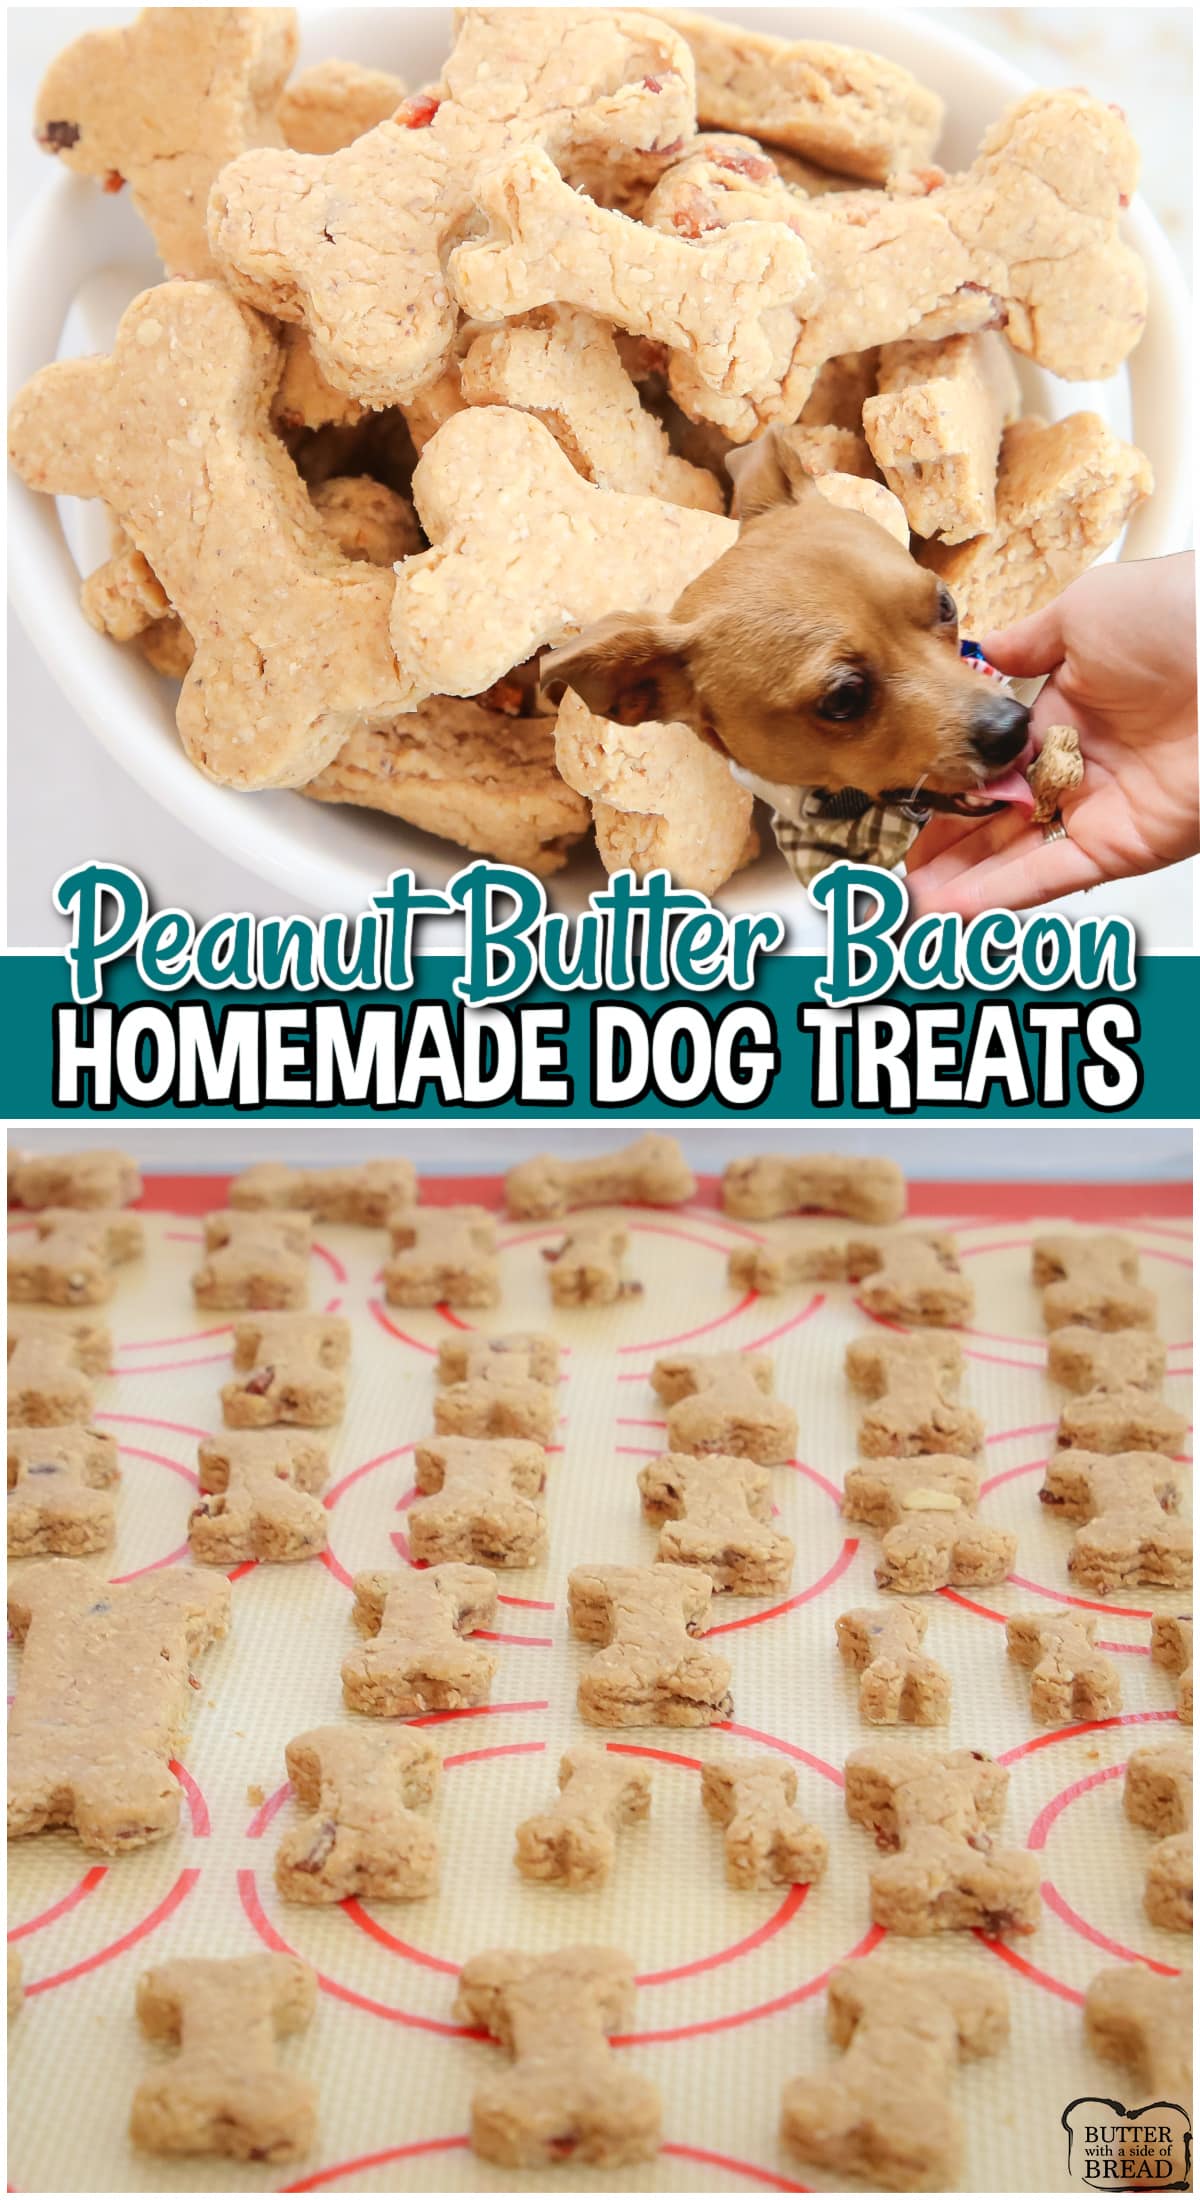 Peanut Butter Bacon Dog Treats are simple, tasty treats your dog will LOVE! Homemade oat flour combined with peanut butter and crumbled bacon for a protein packed dog biscuit that will be devoured! 